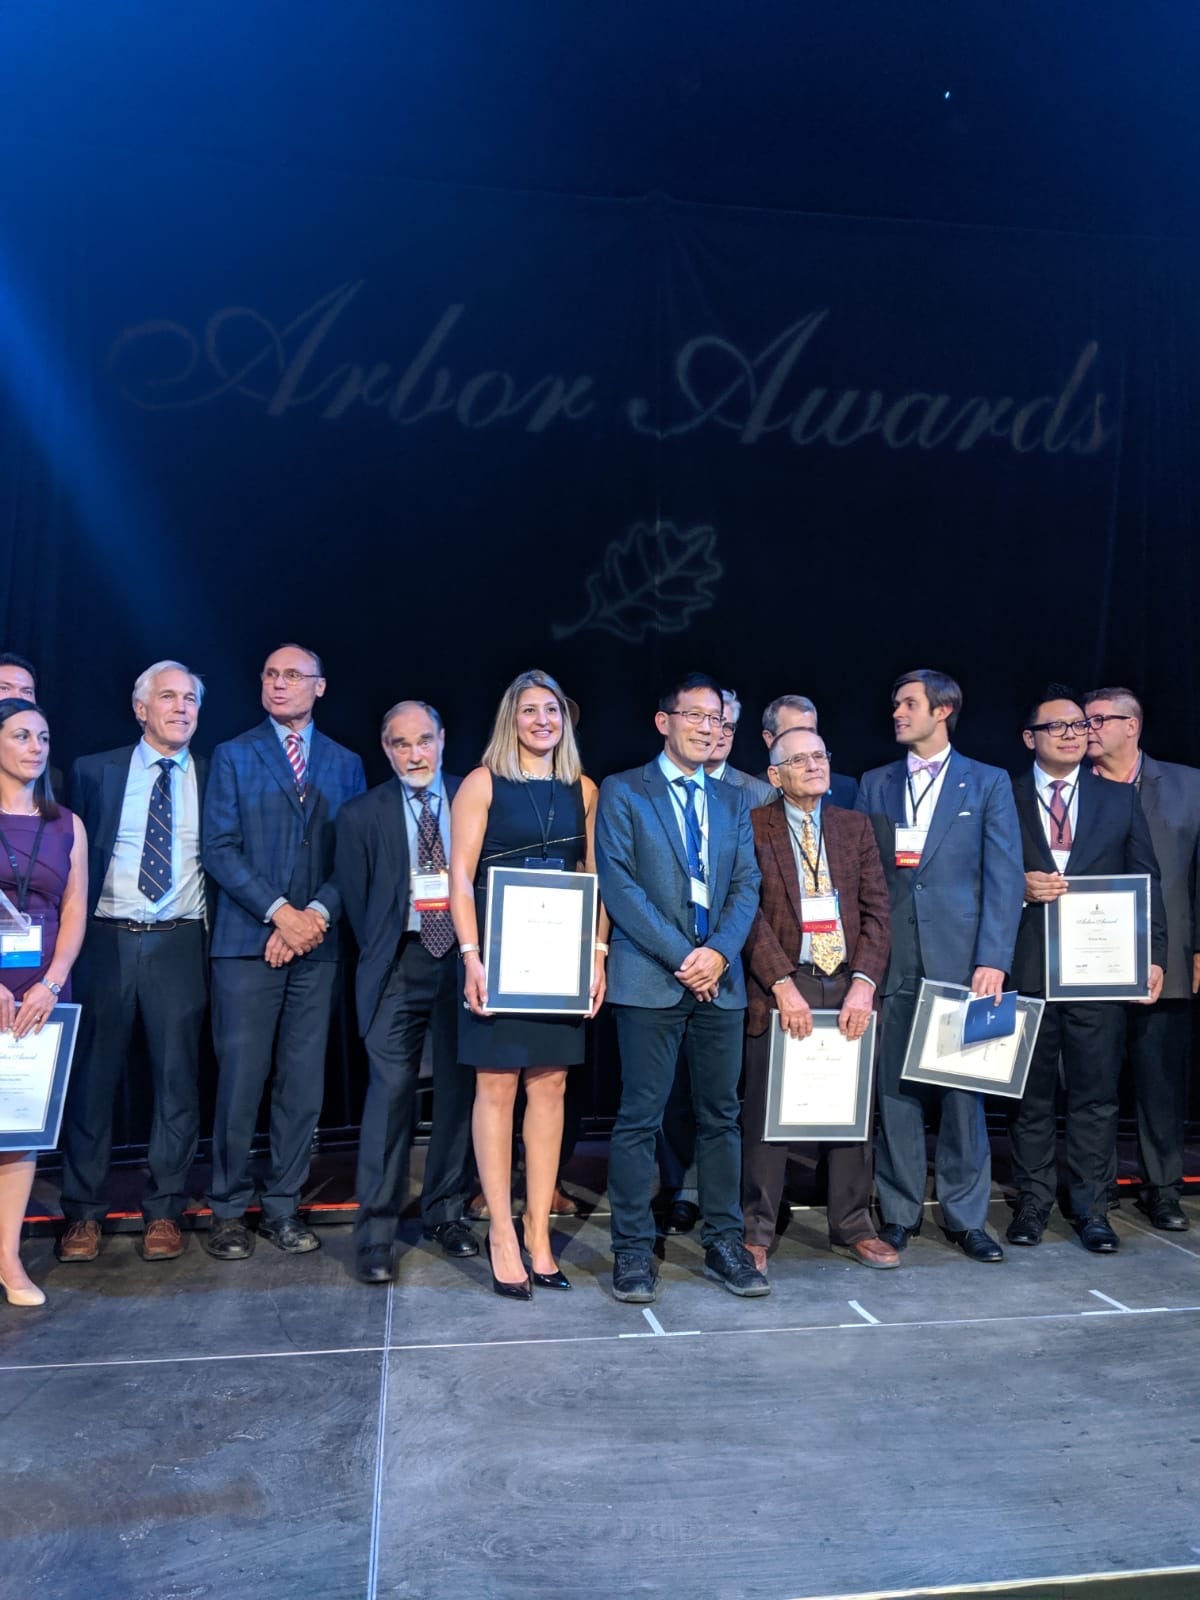 Arbor Awards with Chris Yip, Dean of Applied Science and Engineering, University of Toronto, and engineering award recipients at